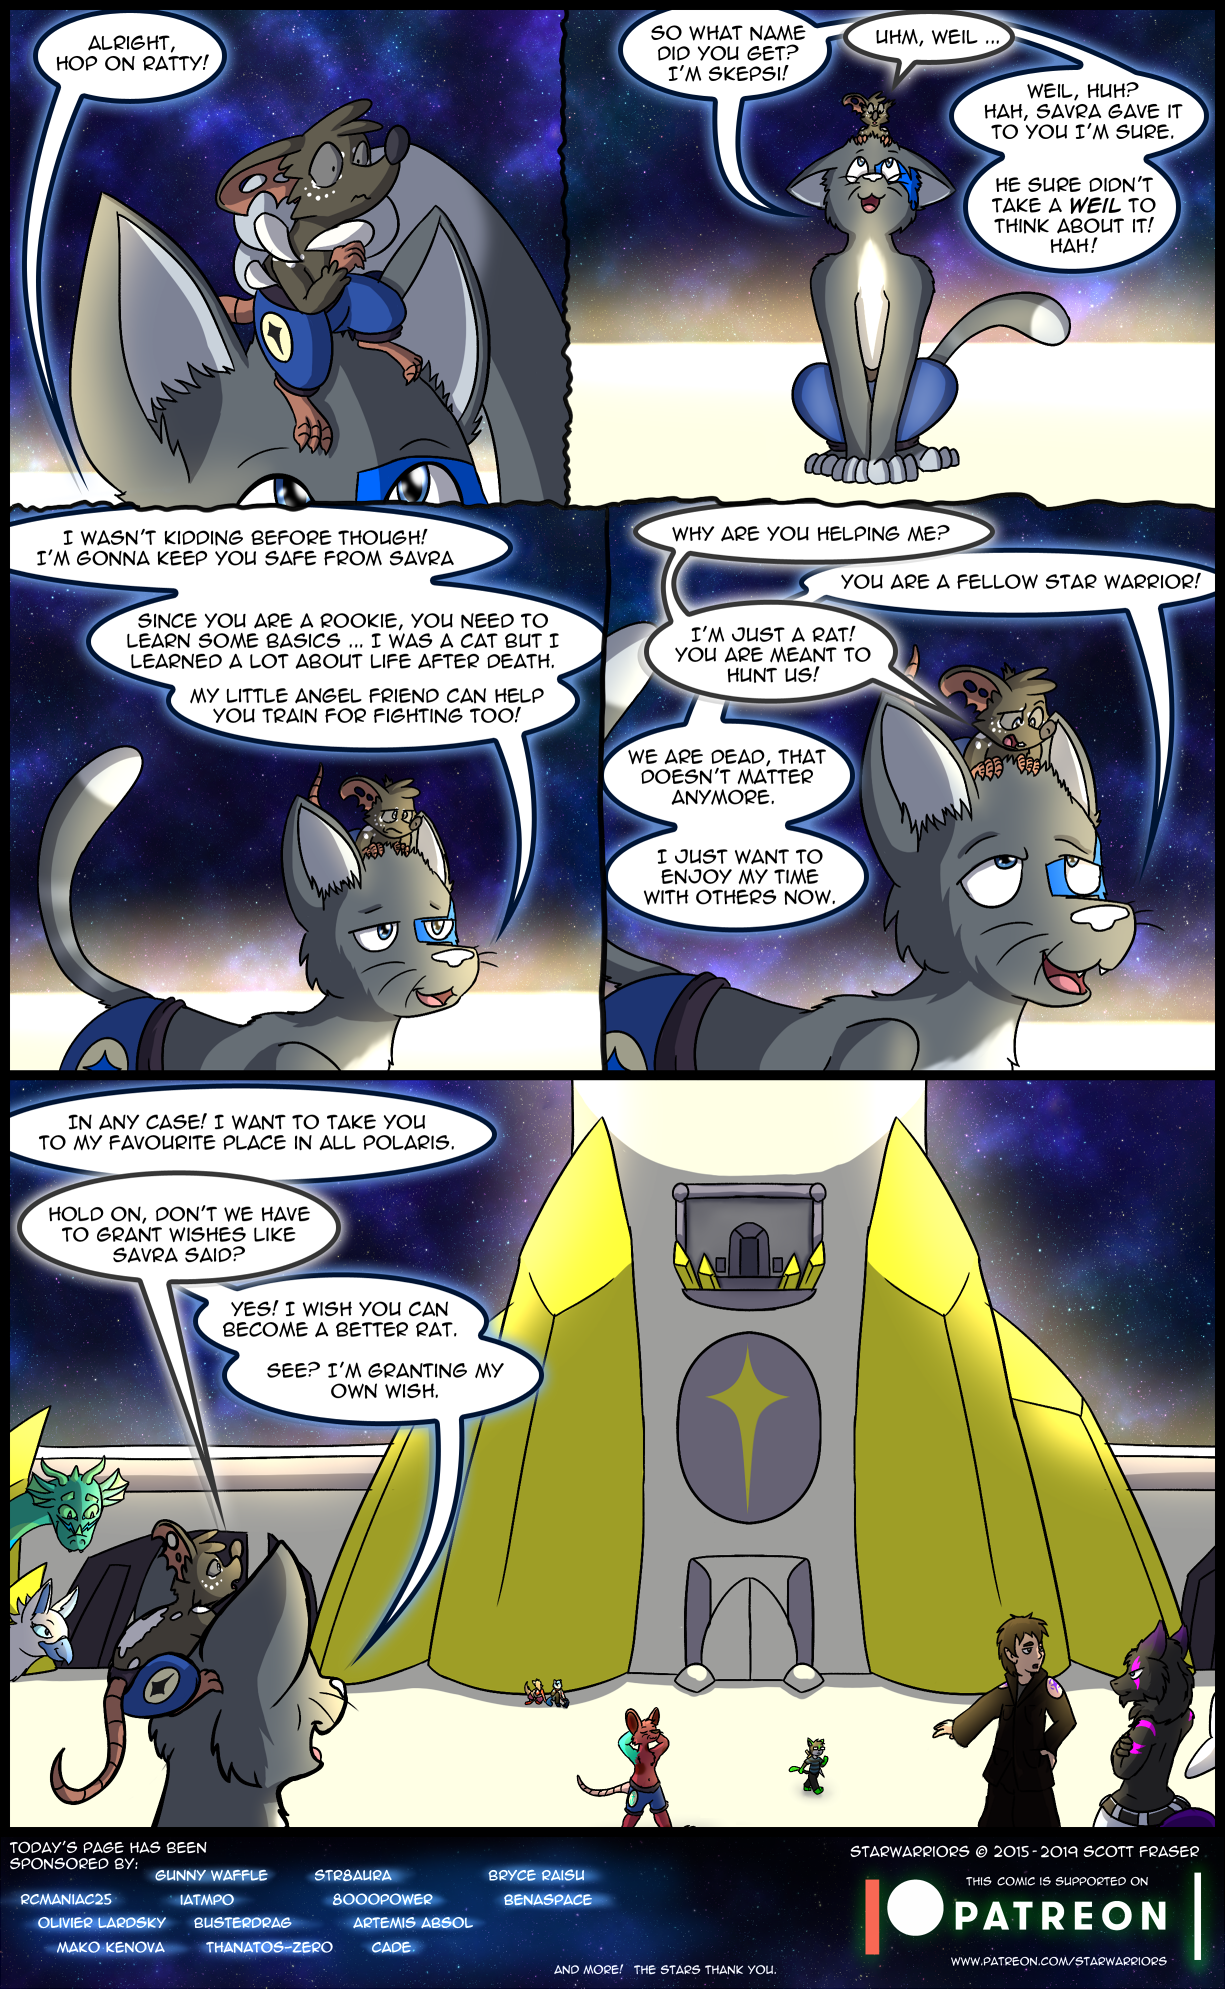 Ch4 Page 26 – A Better Rat